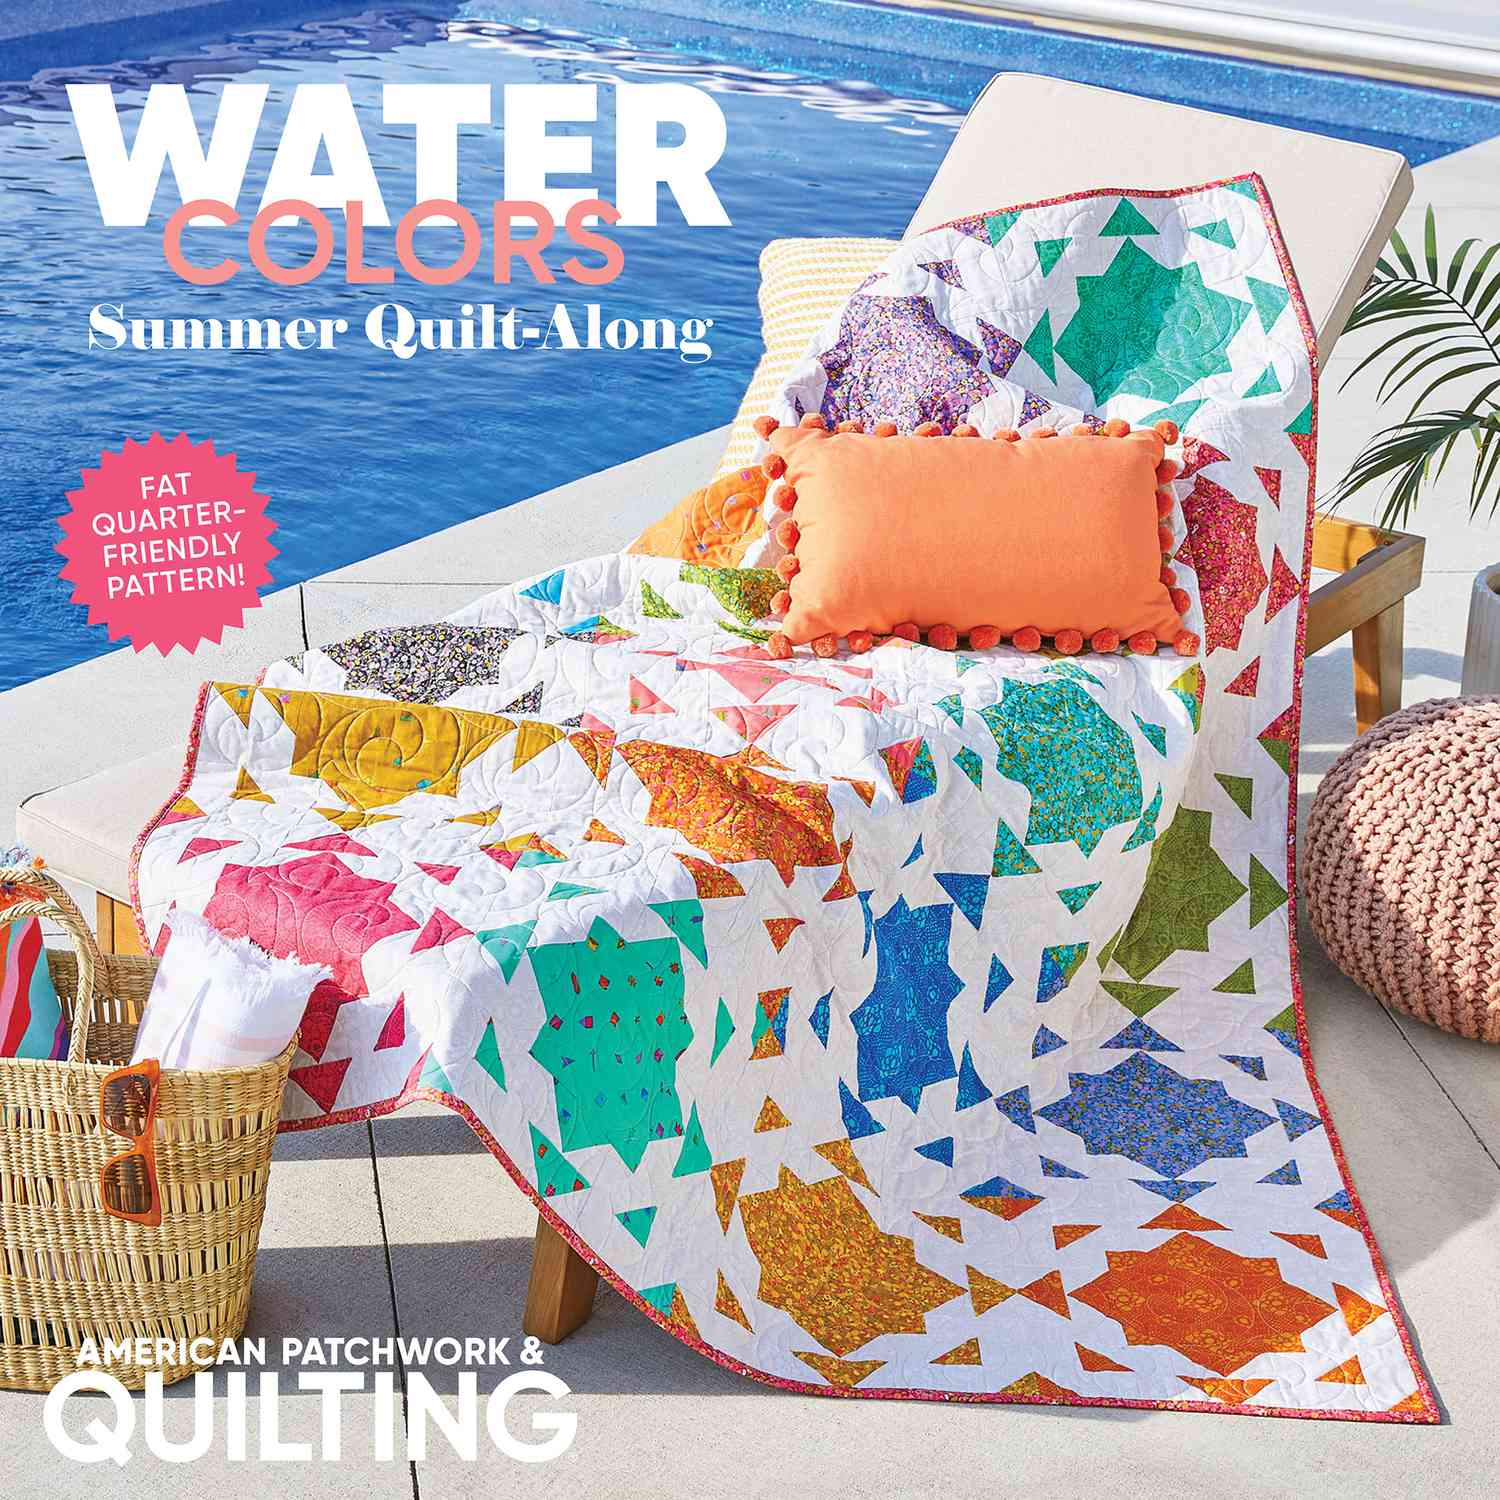 Water Colors Quilt-Along